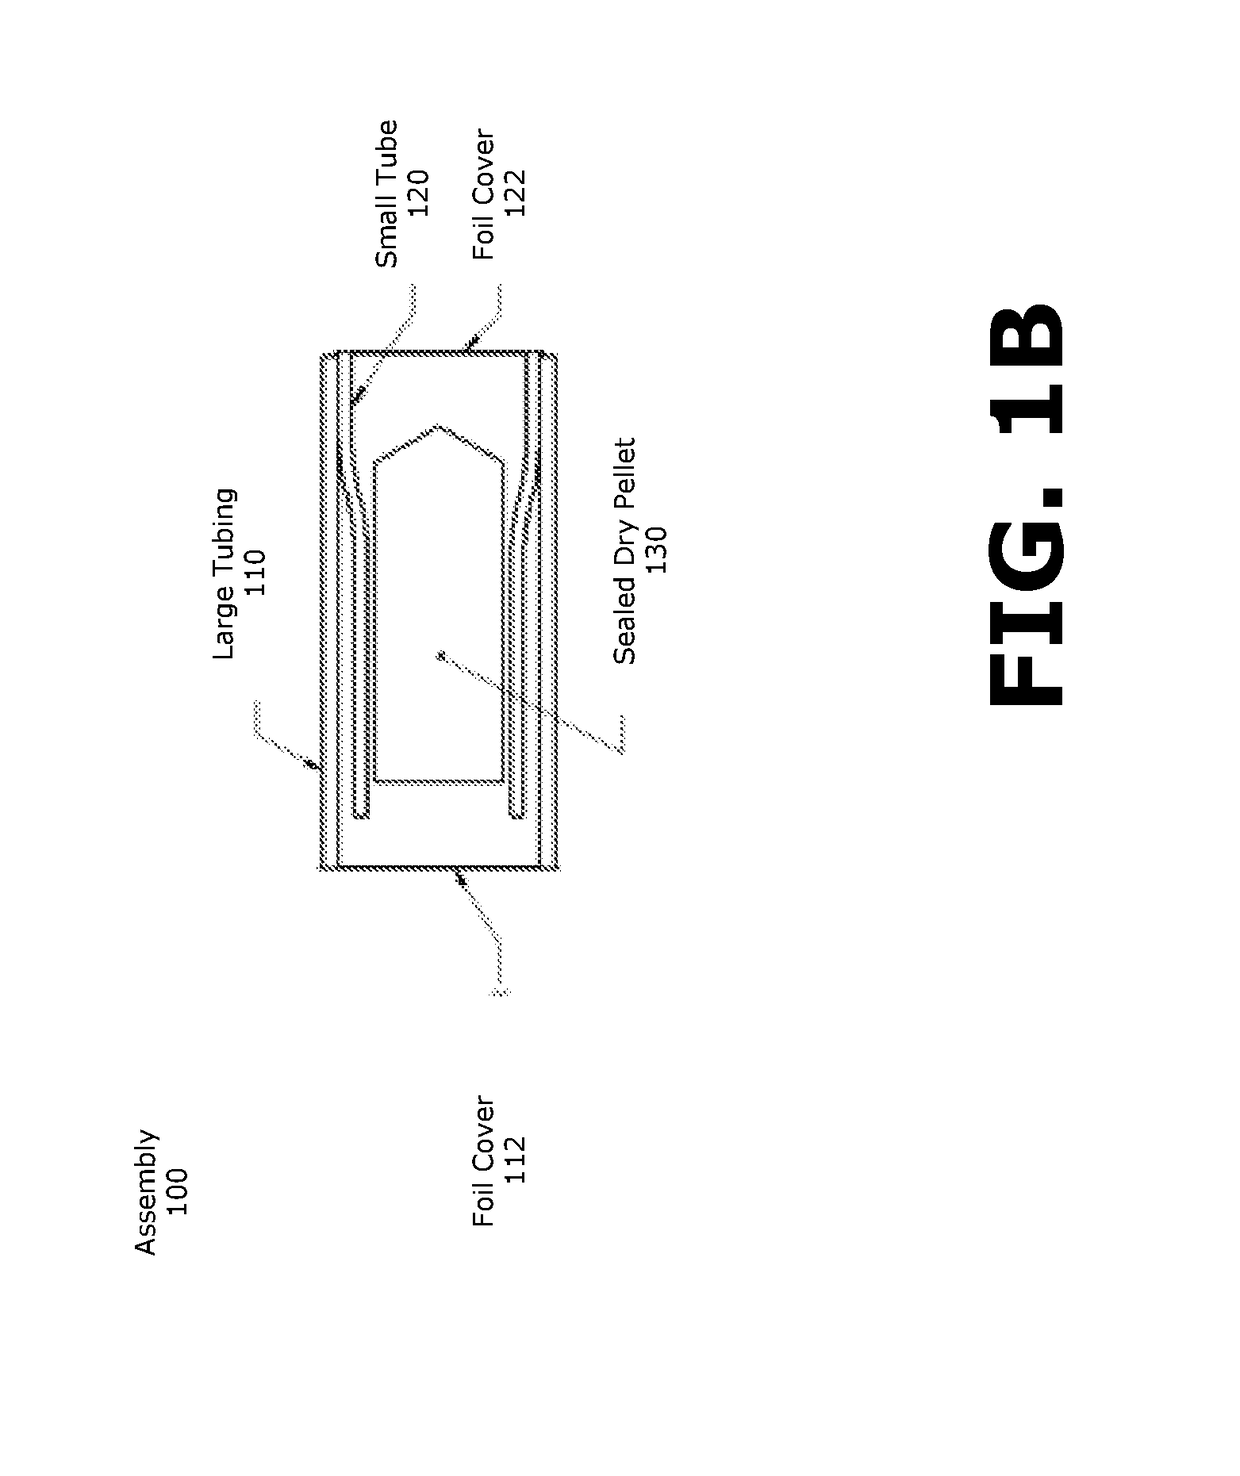 Solid drug storage apparatus, formulations and methods of use